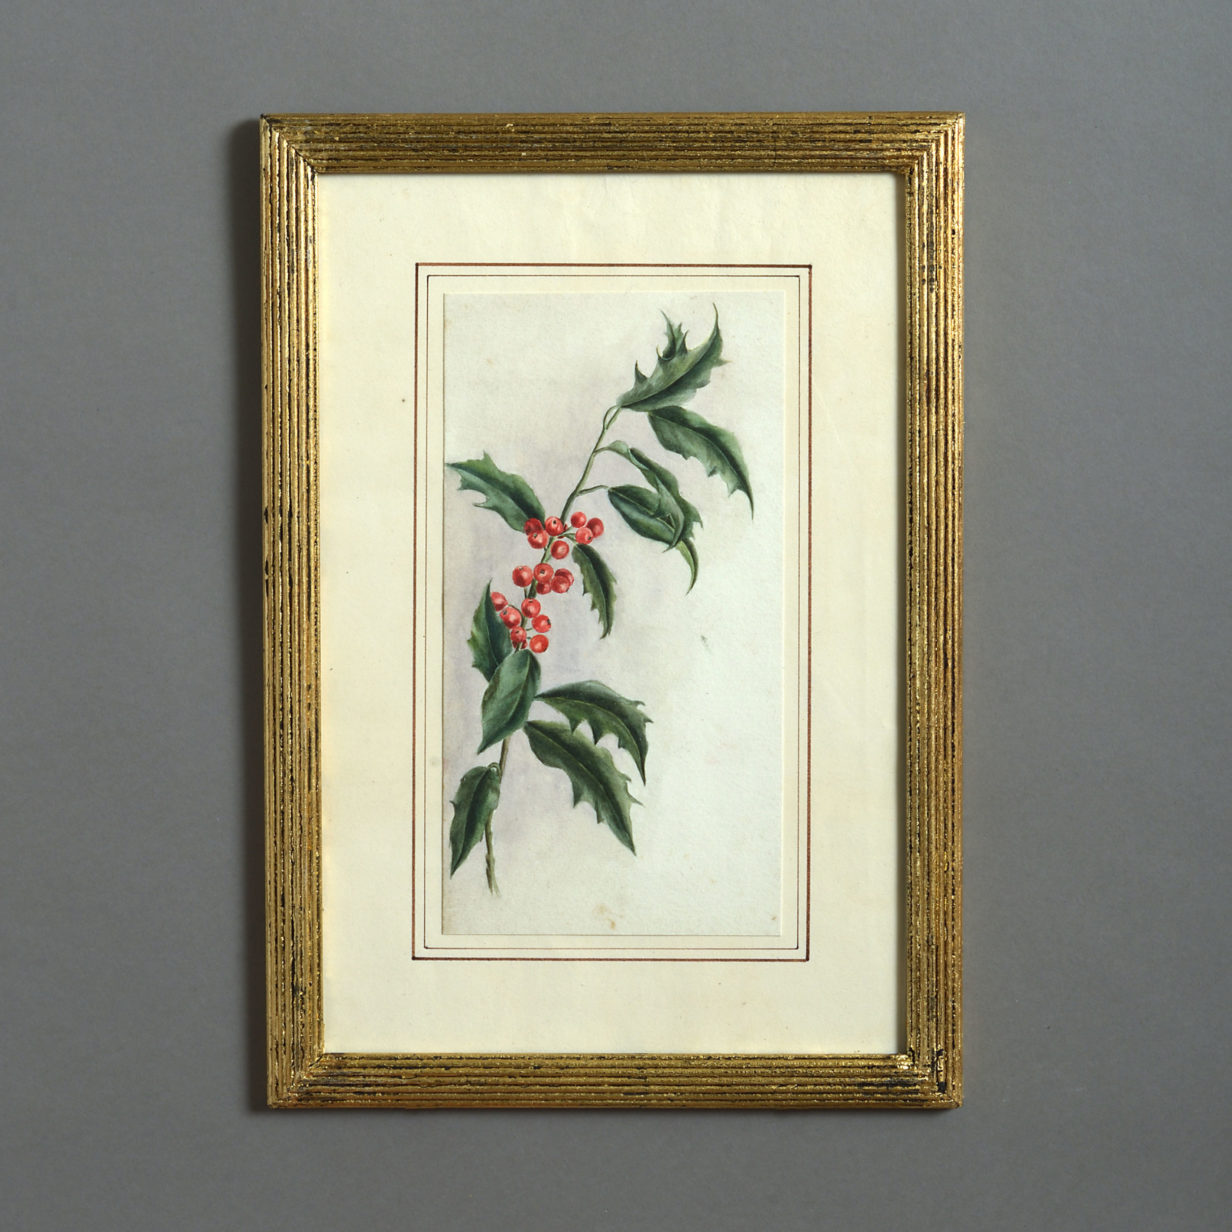 A late 19th century watercolour study of holly